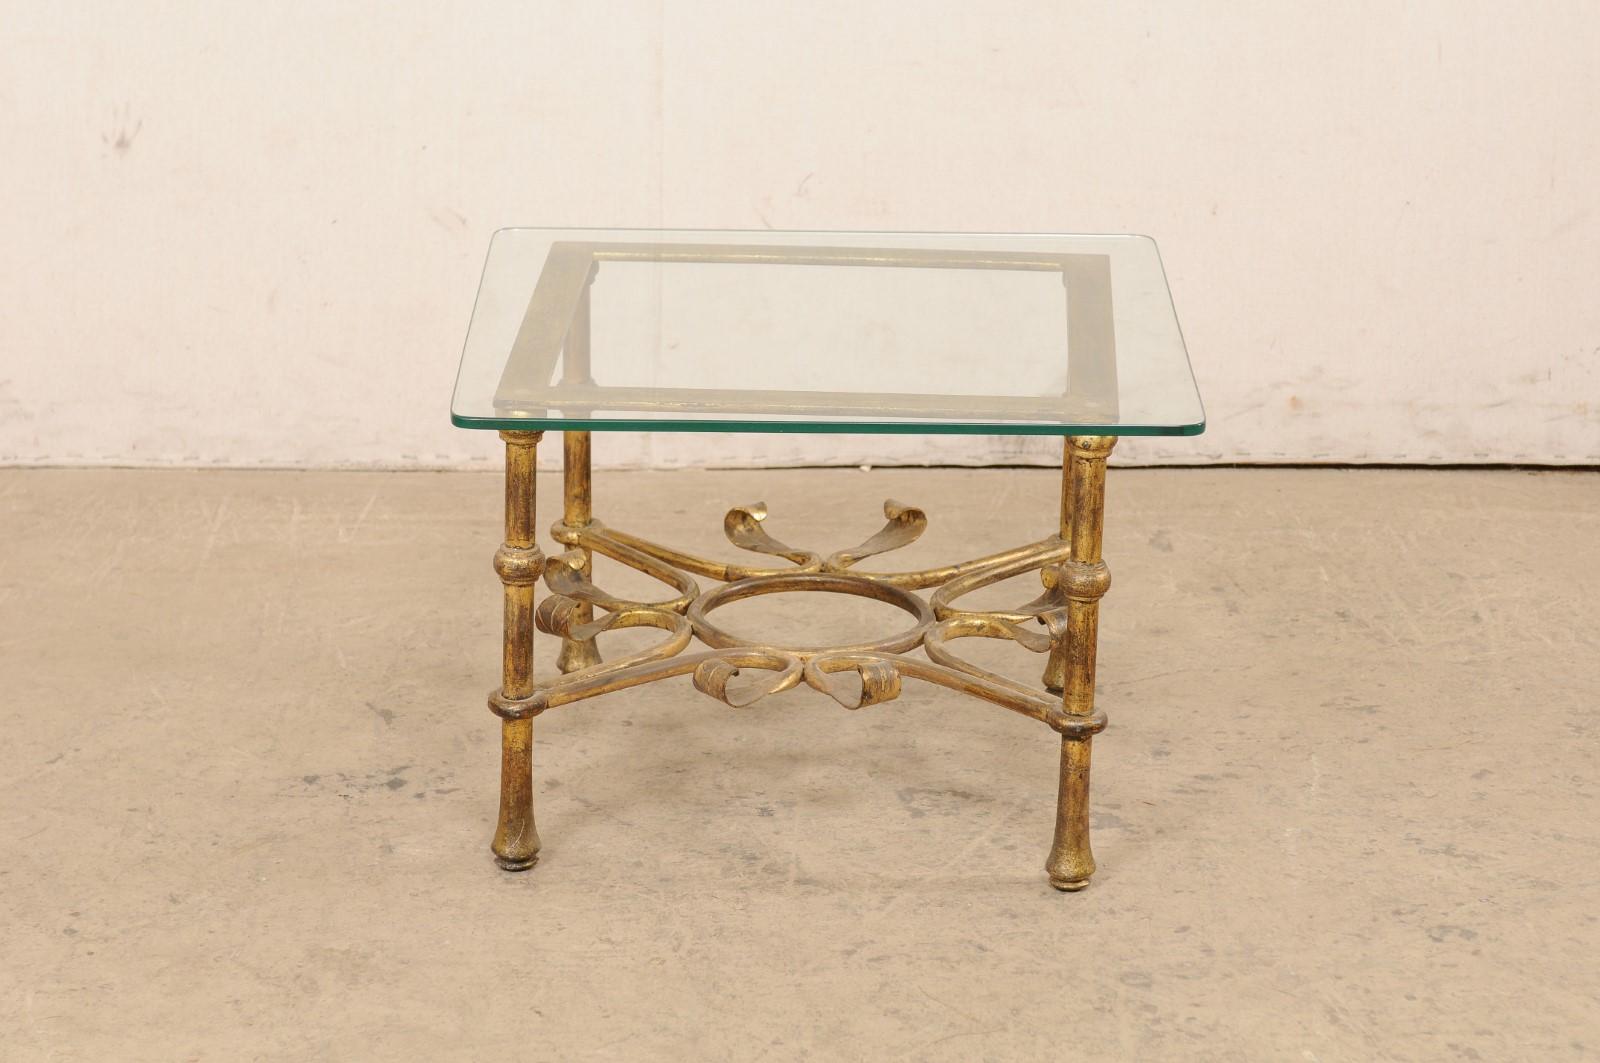 Spanish Accent Table with Gilt Iron Base & Square-Shaped Glass Top, Mid 20th C. For Sale 8